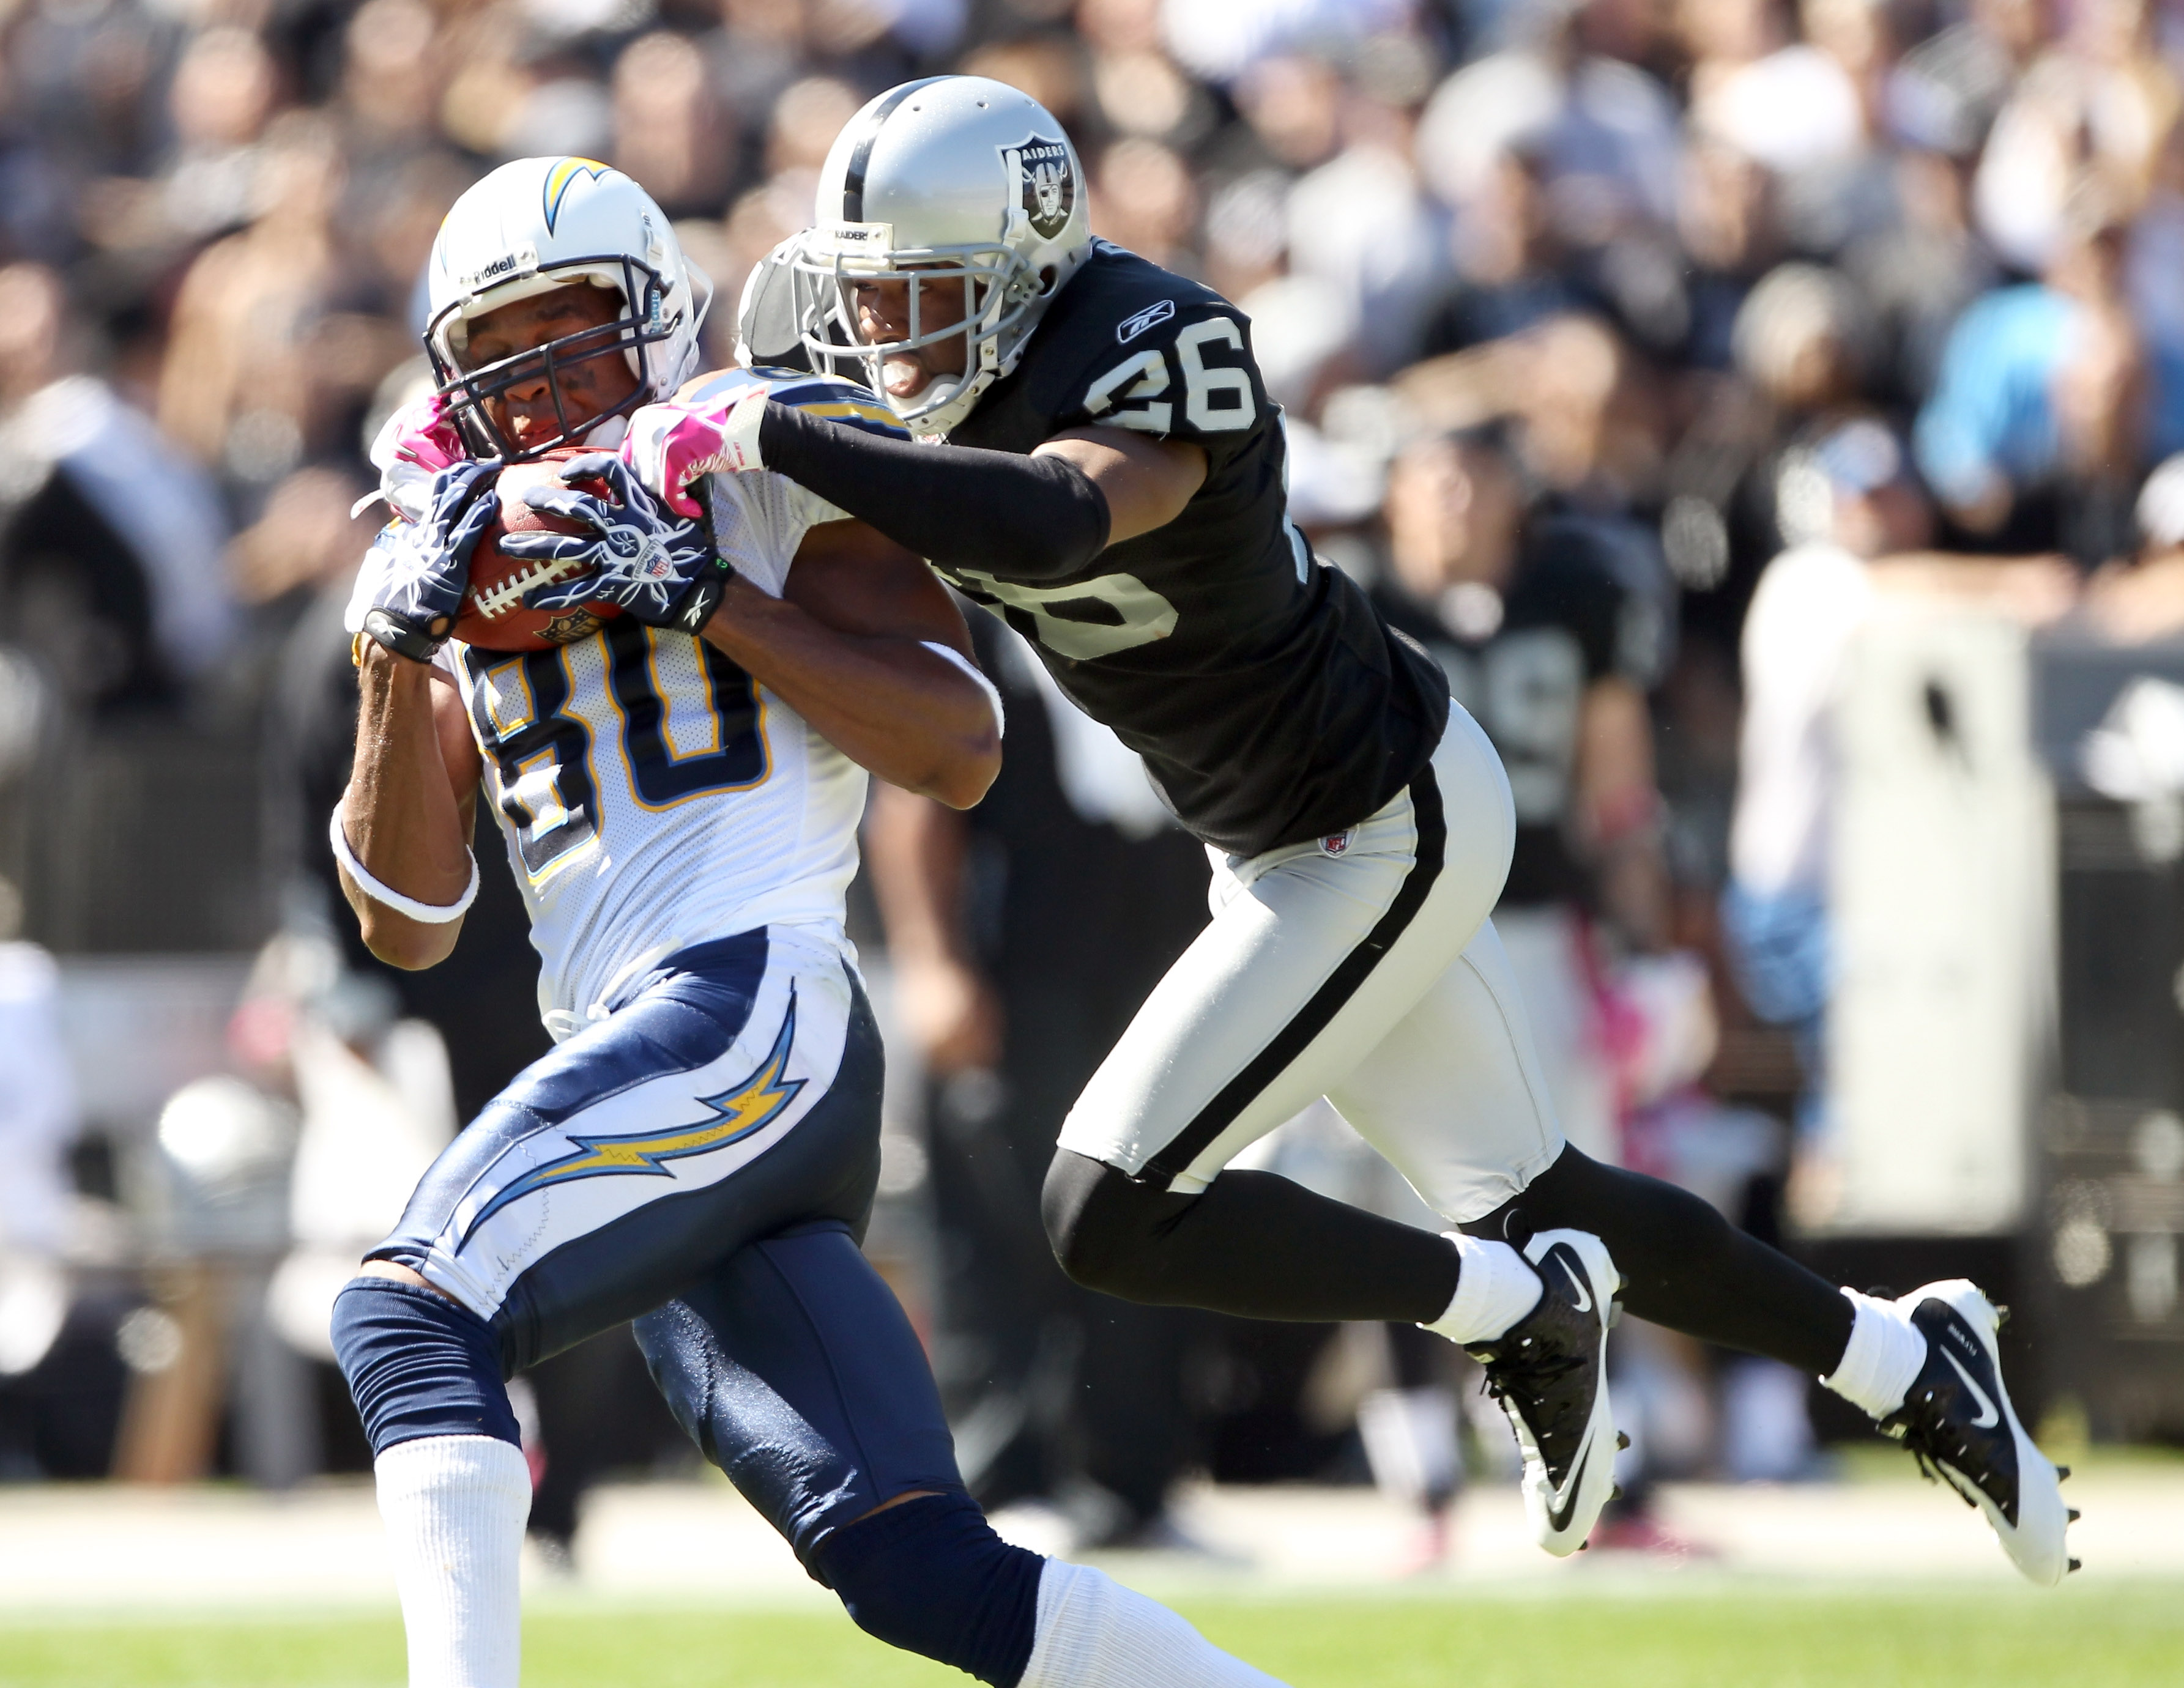 OAKLAND, CA - OCTOBER 10:  Malcom Floyd #80 of the San Diego Chargers catches a ball while defended by Stanford Routt #26 of the Oakland Raiders at Oakland-Alameda County Coliseum on October 10, 2010 in Oakland, California.  (Photo by Ezra Shaw/Getty Imag